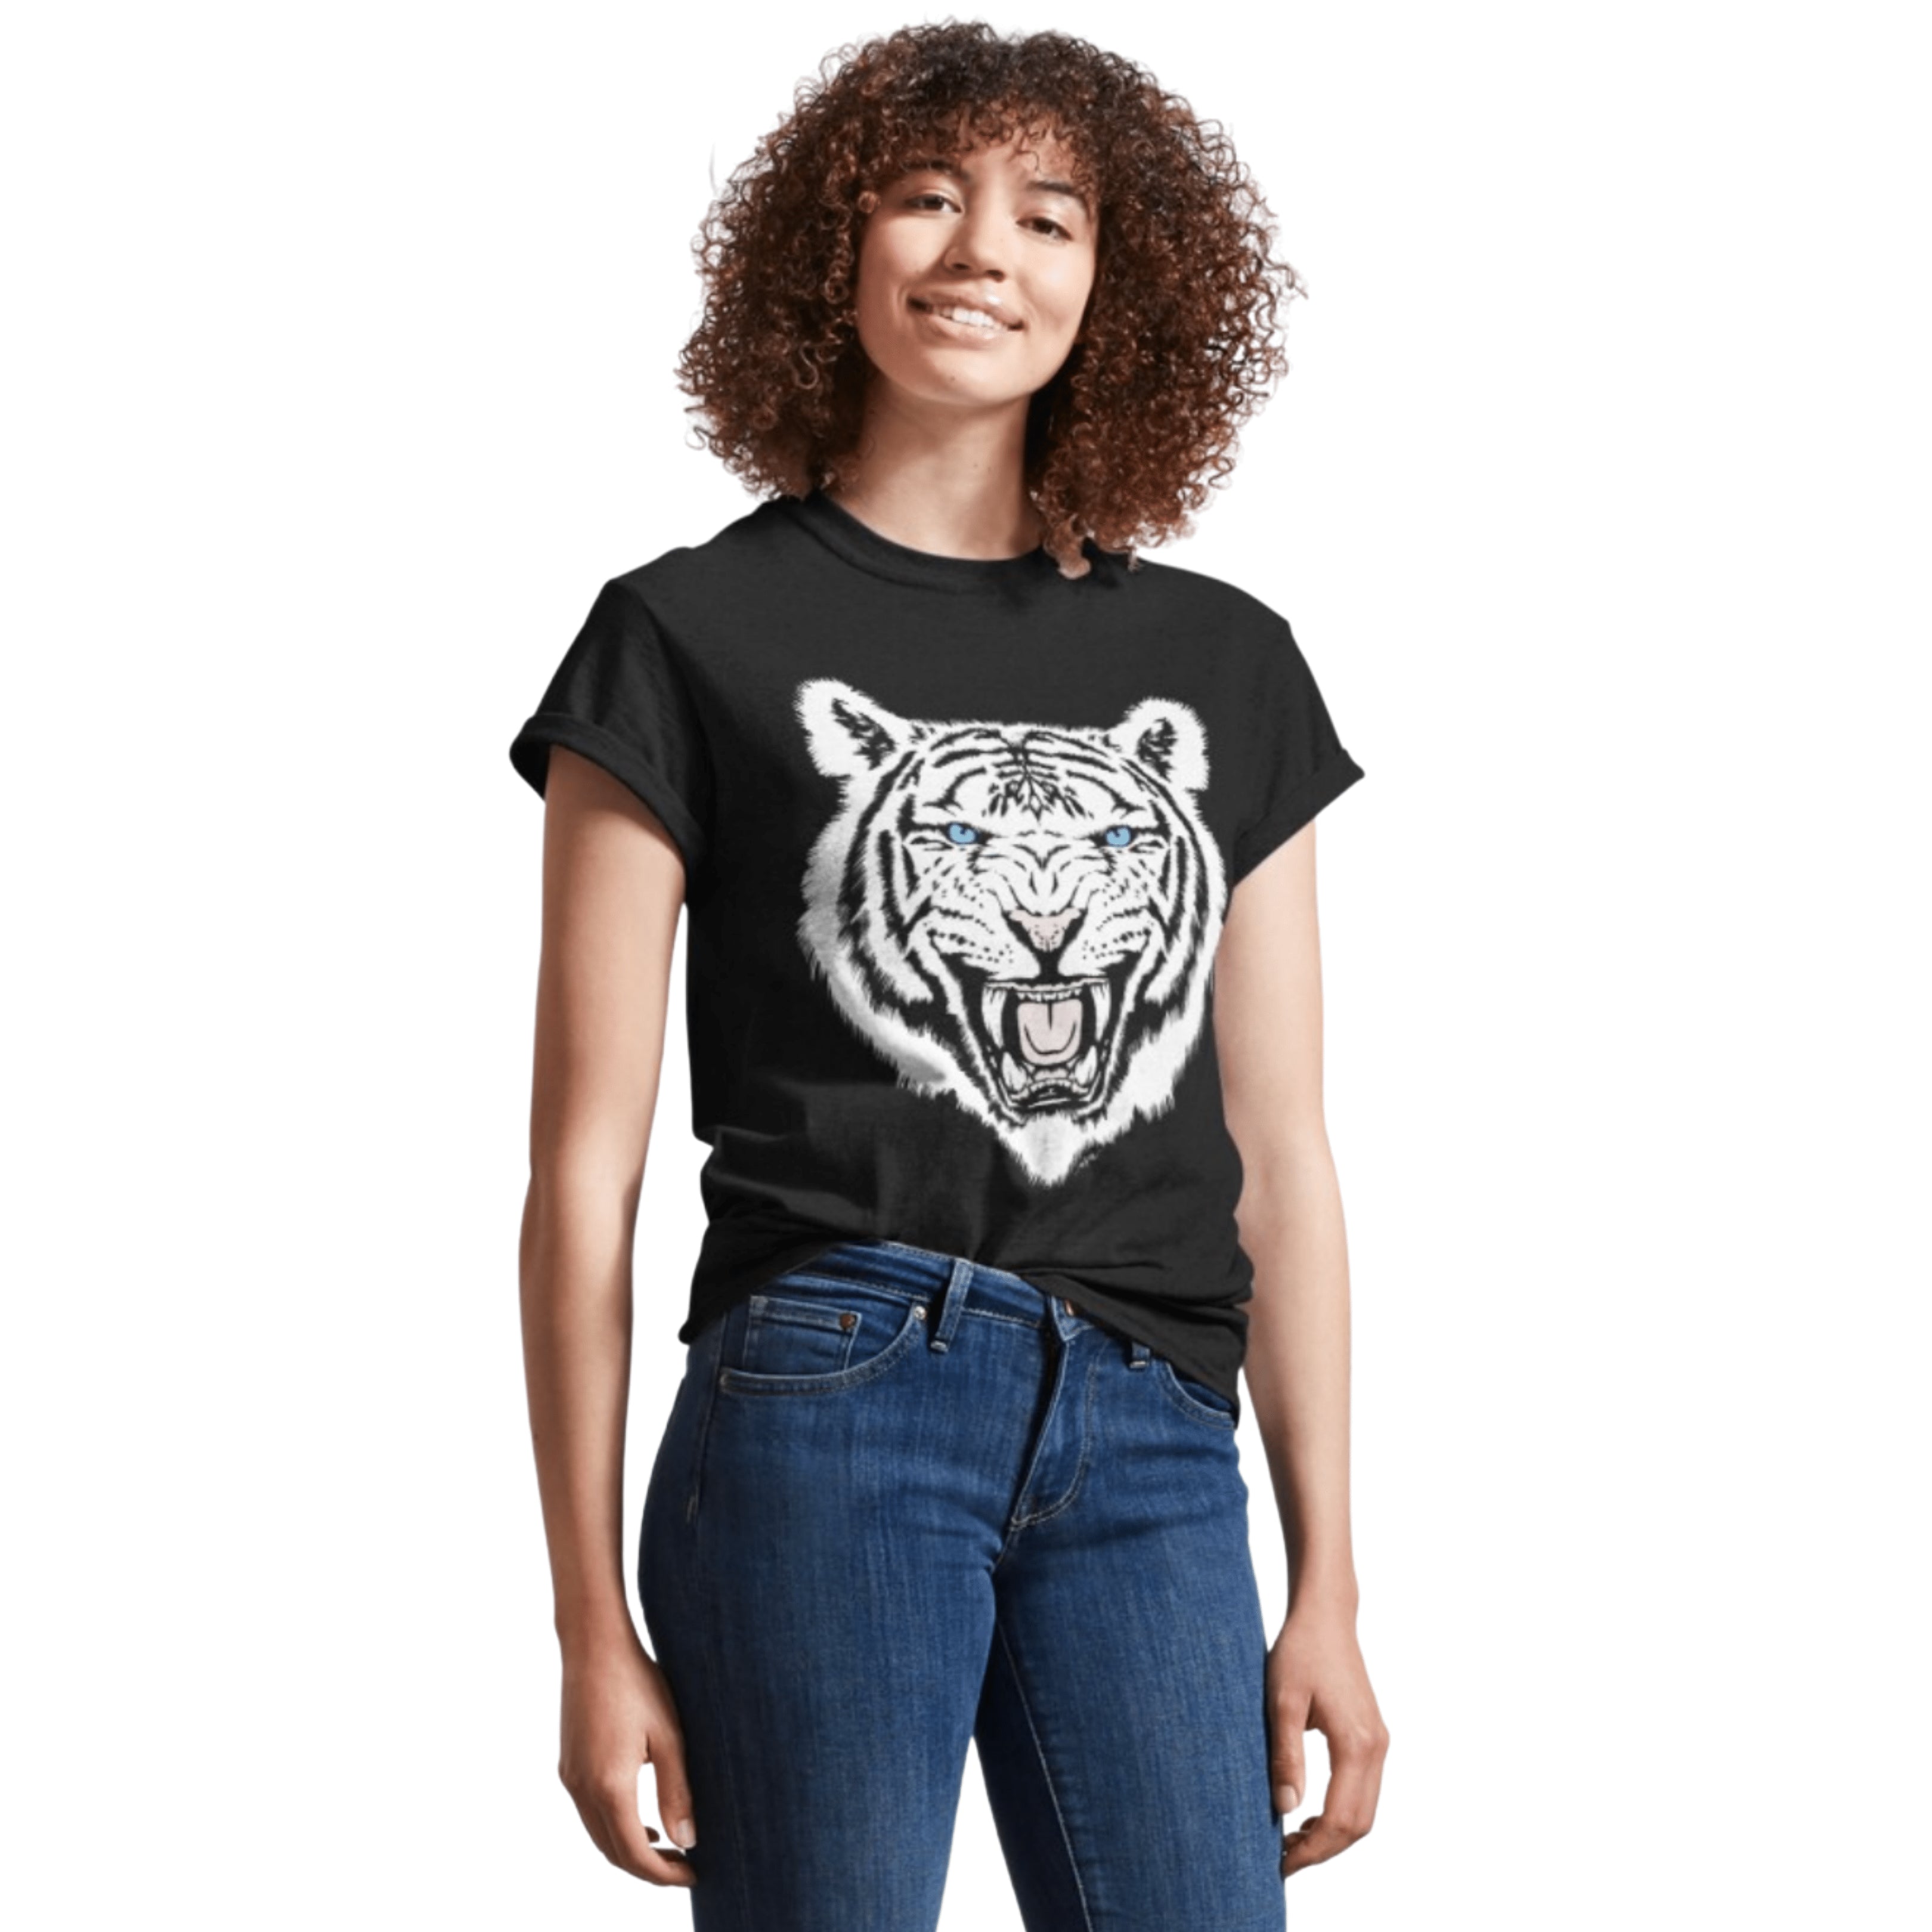 AECH ACTIVE - White Tiger Print Easy Tiger Tee